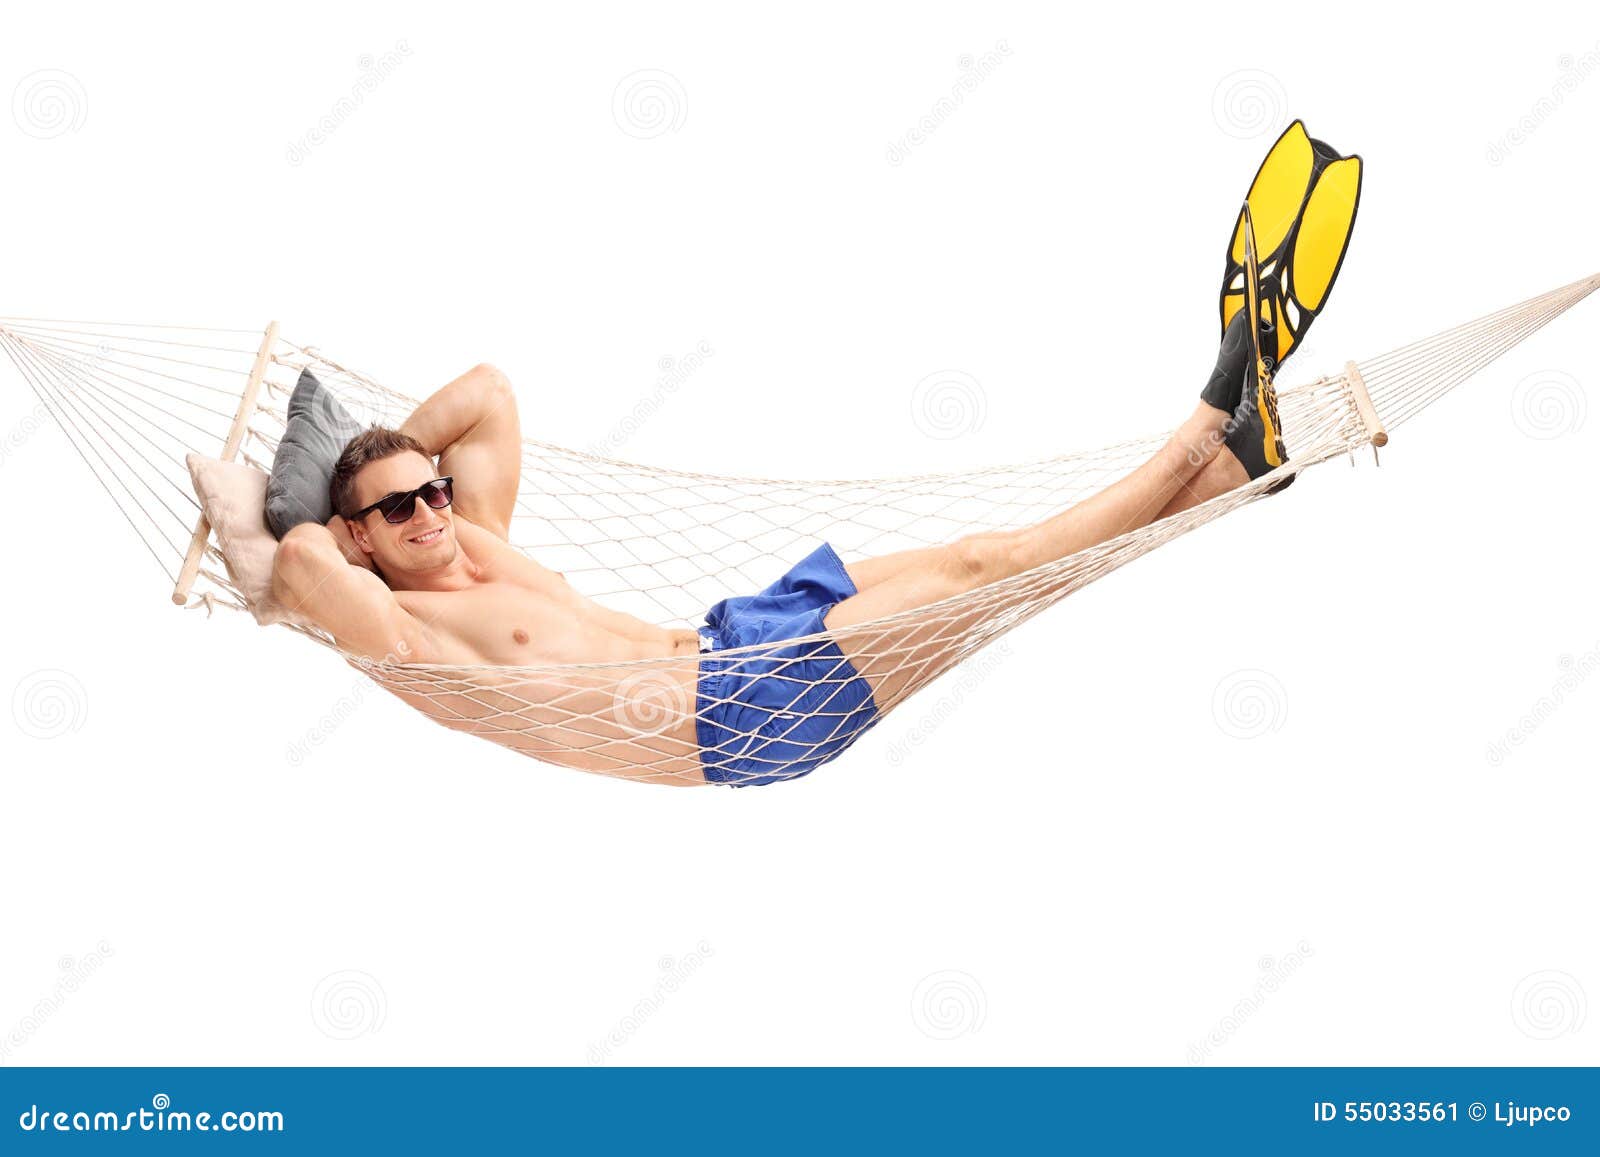 Everything You Could Possibly Want to Know About Hammocks